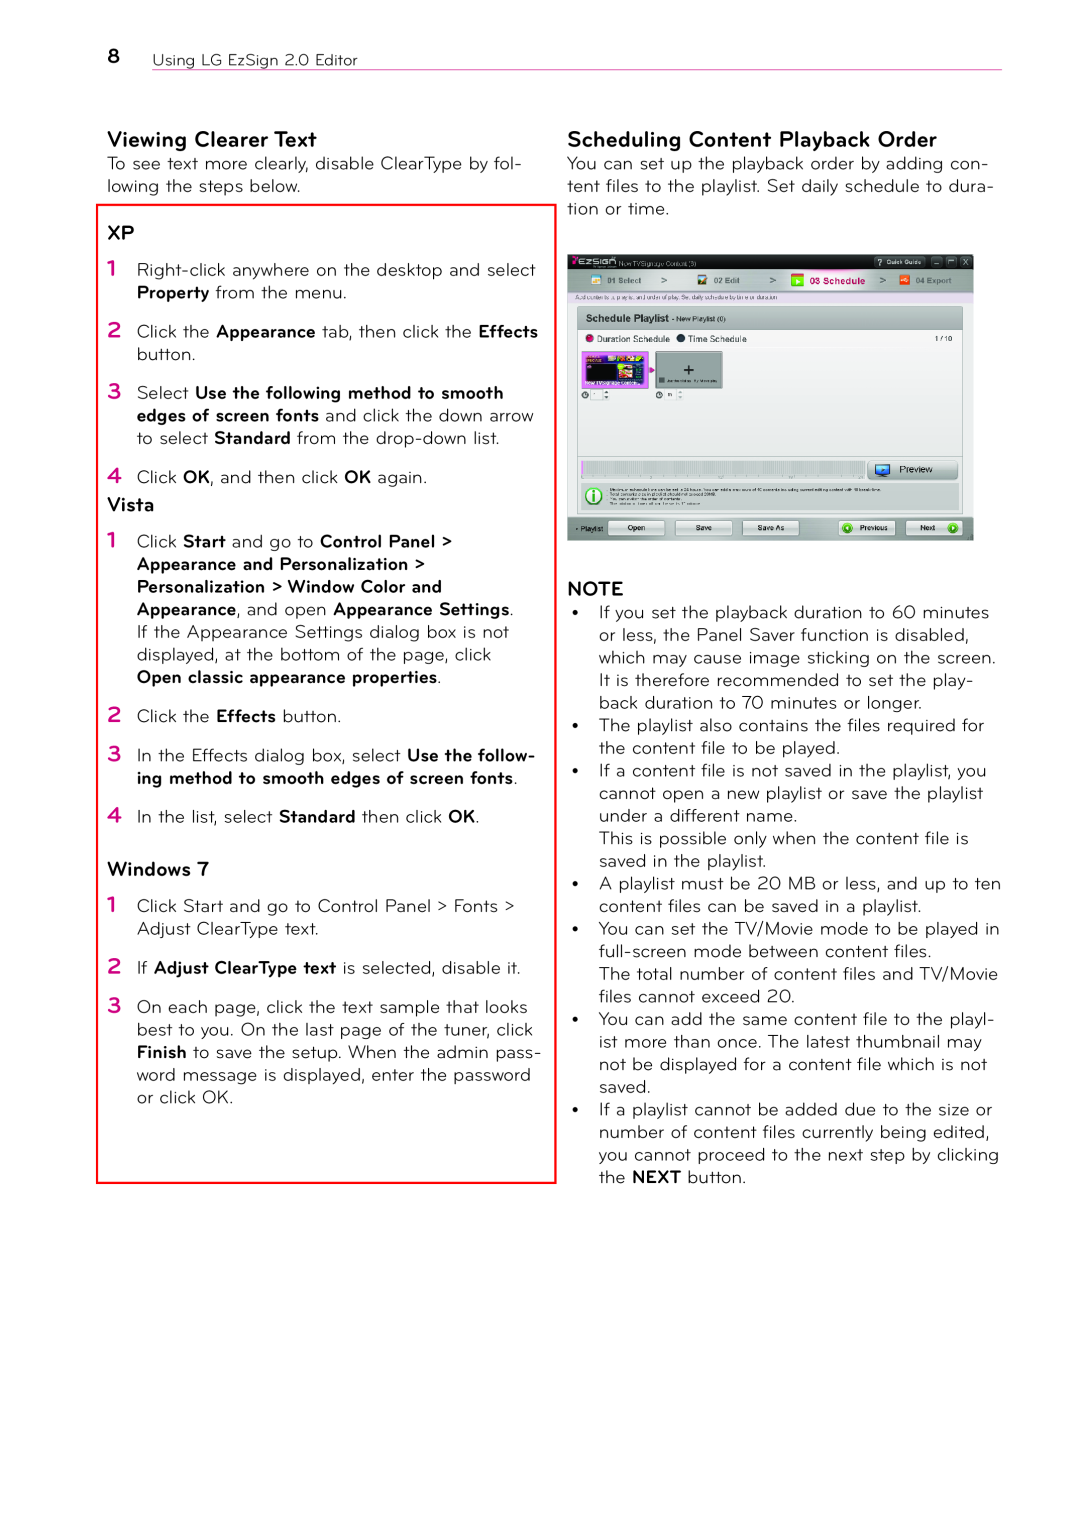 LG Electronics 2 manual Viewing Clearer Text, Scheduling Content Playback Order, Vista, Windows 